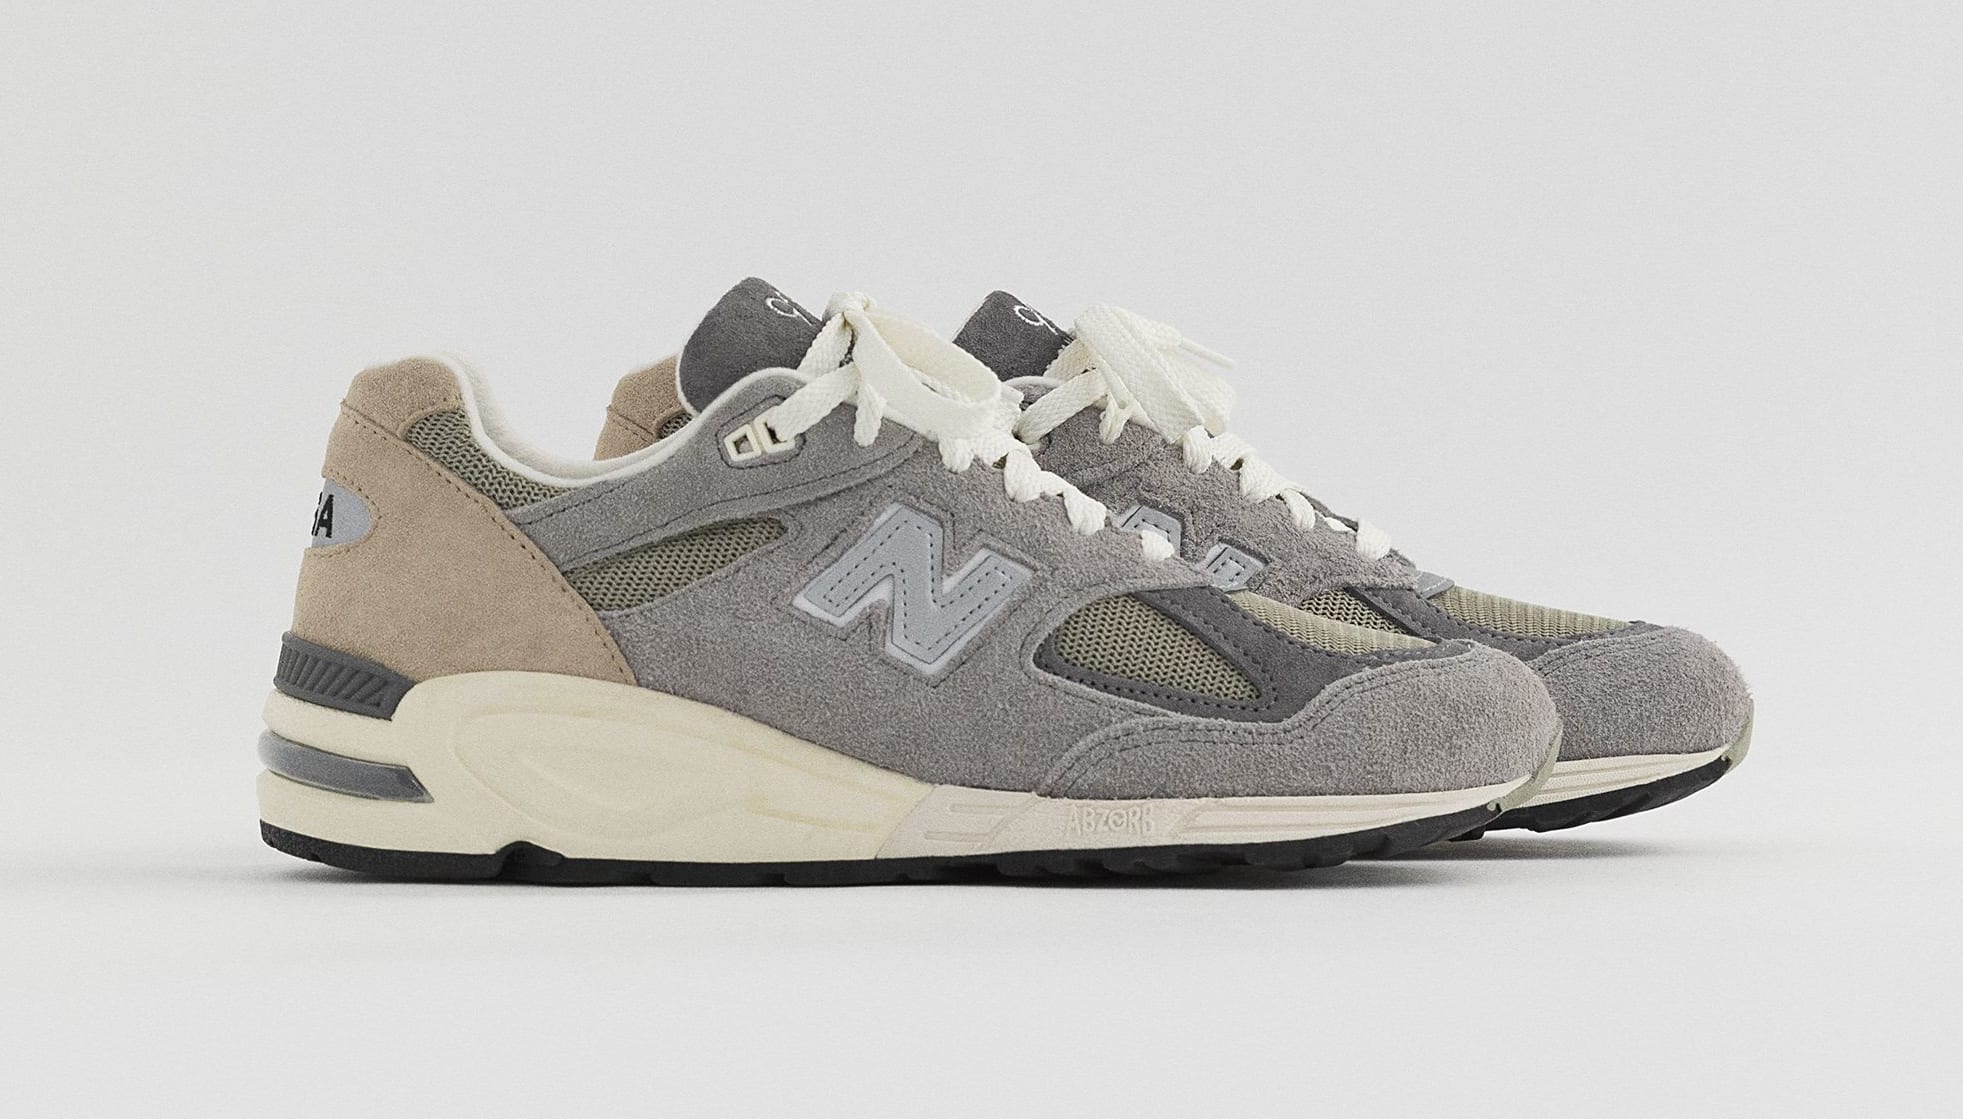 Here's A First Look At Aime Leon Dore's Teddy Santis New Balance